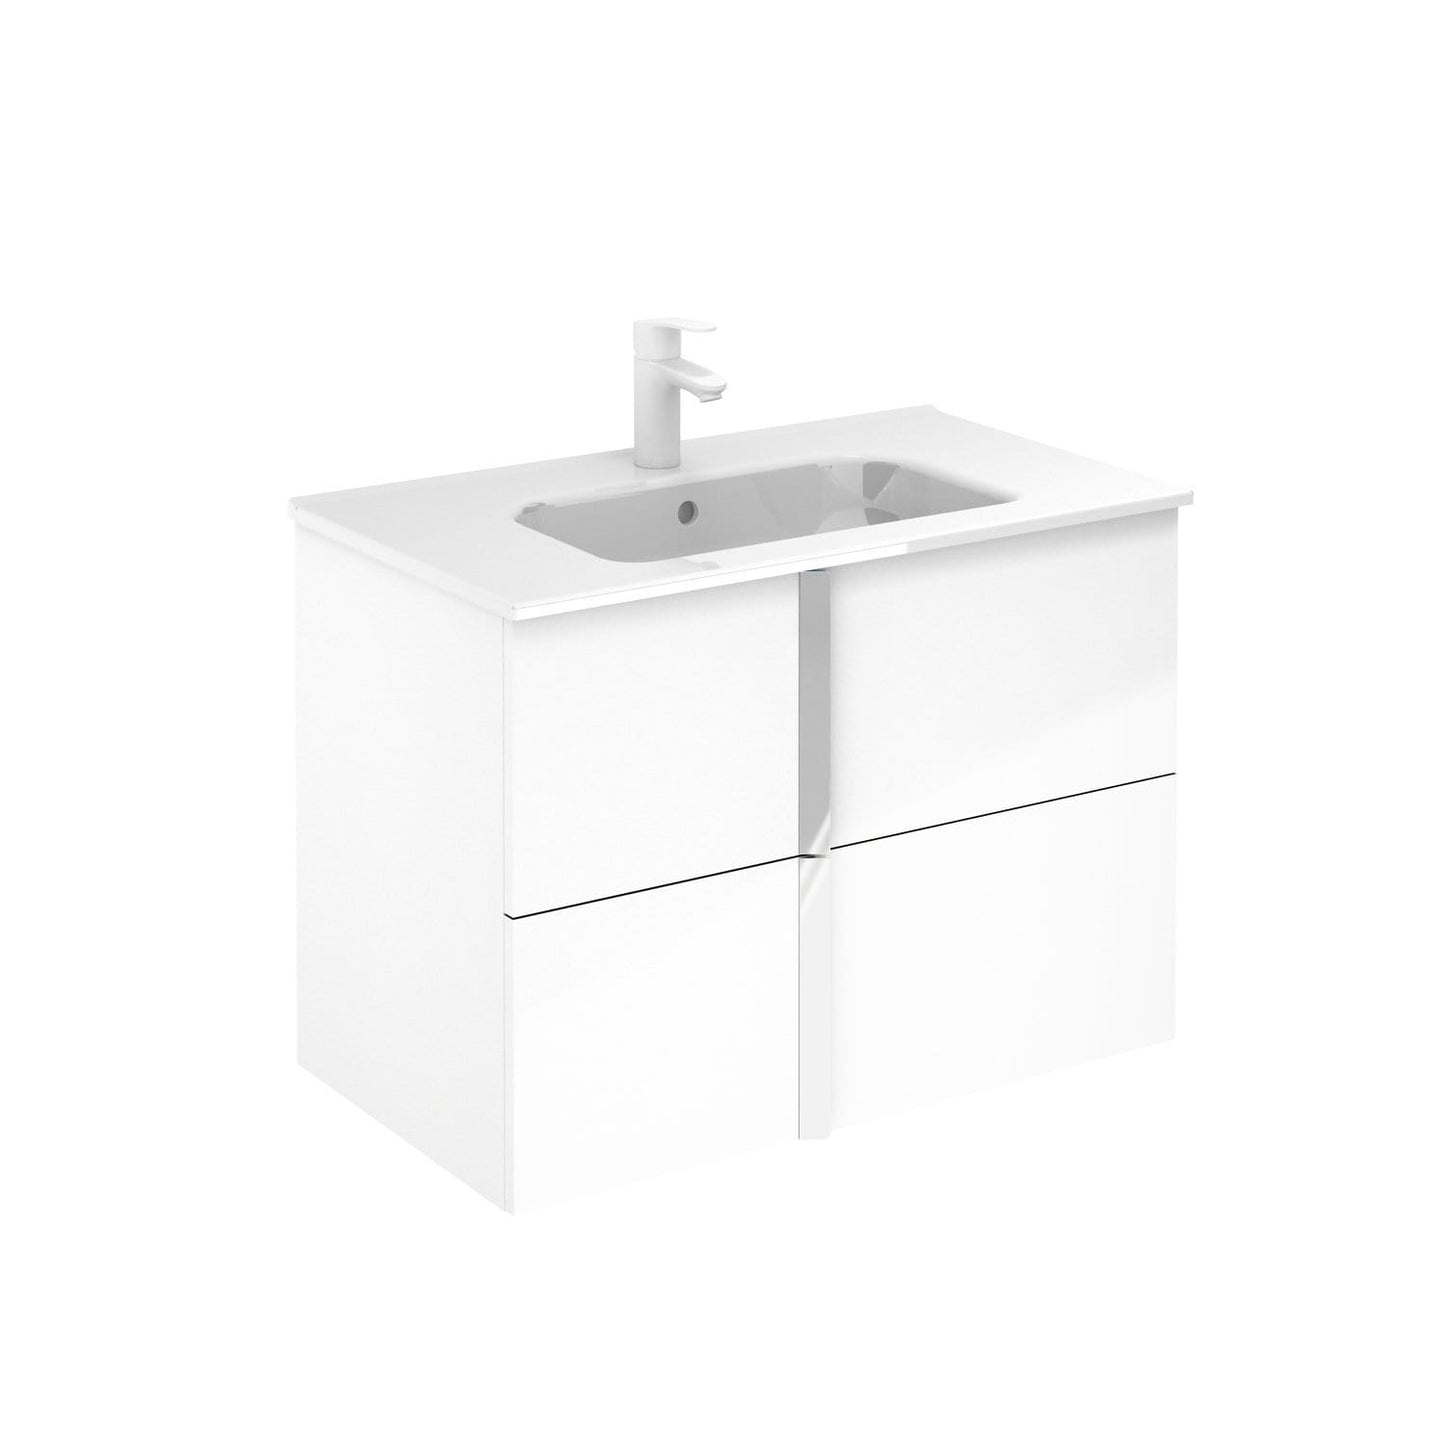 Onix Modern Wall Mounted Bathroom Vanity. 32 Inches. White. 2 Drawer with basin